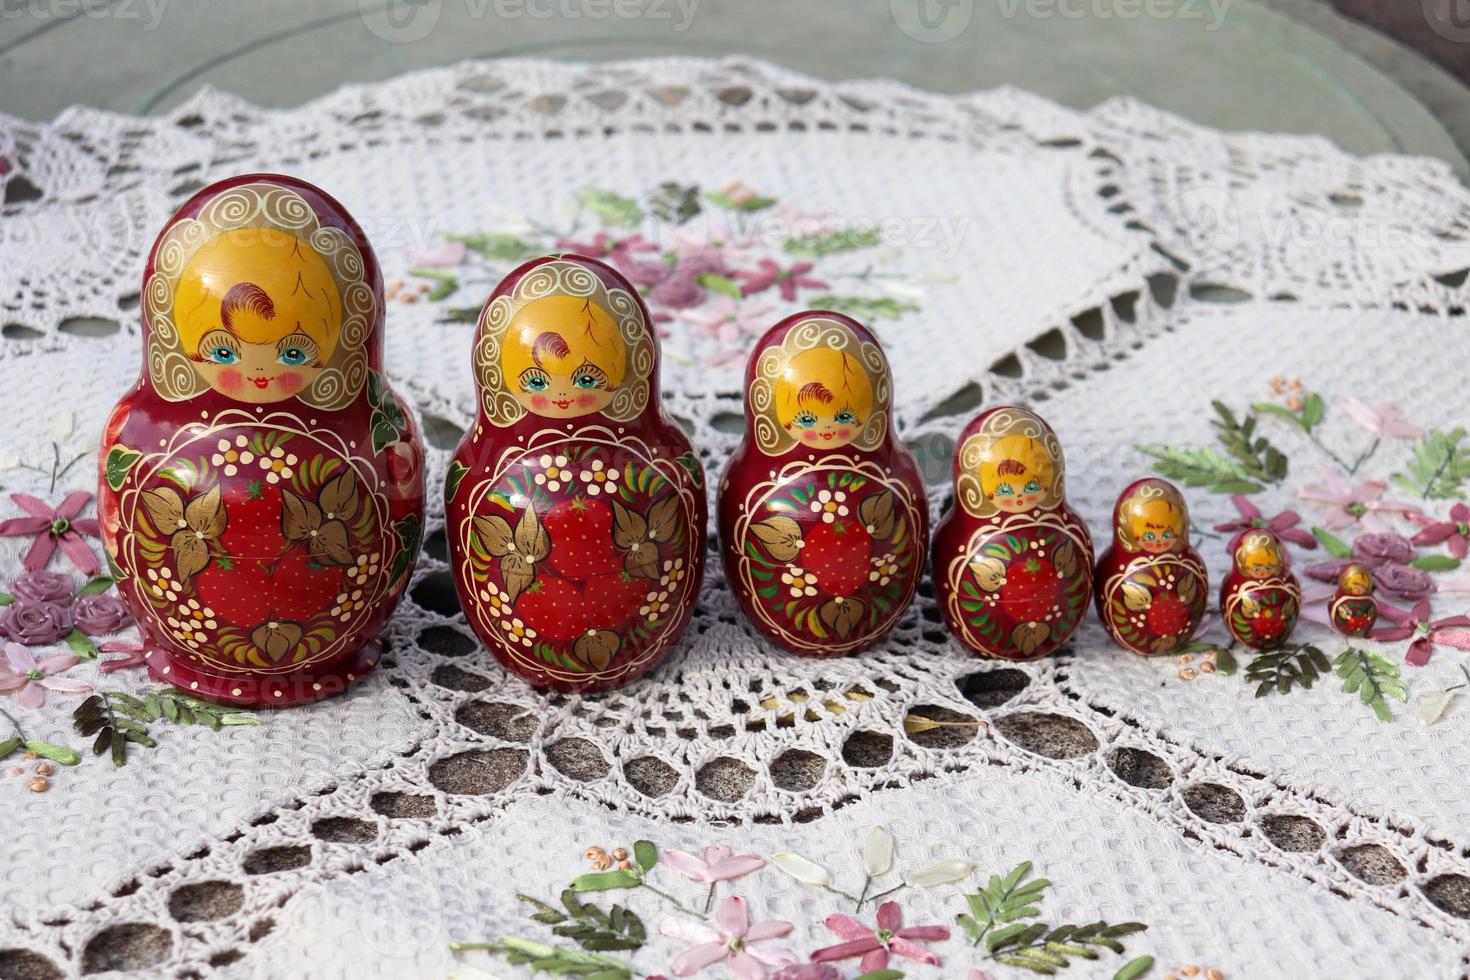 wooden nesting dolls on an embroidered napkin photo